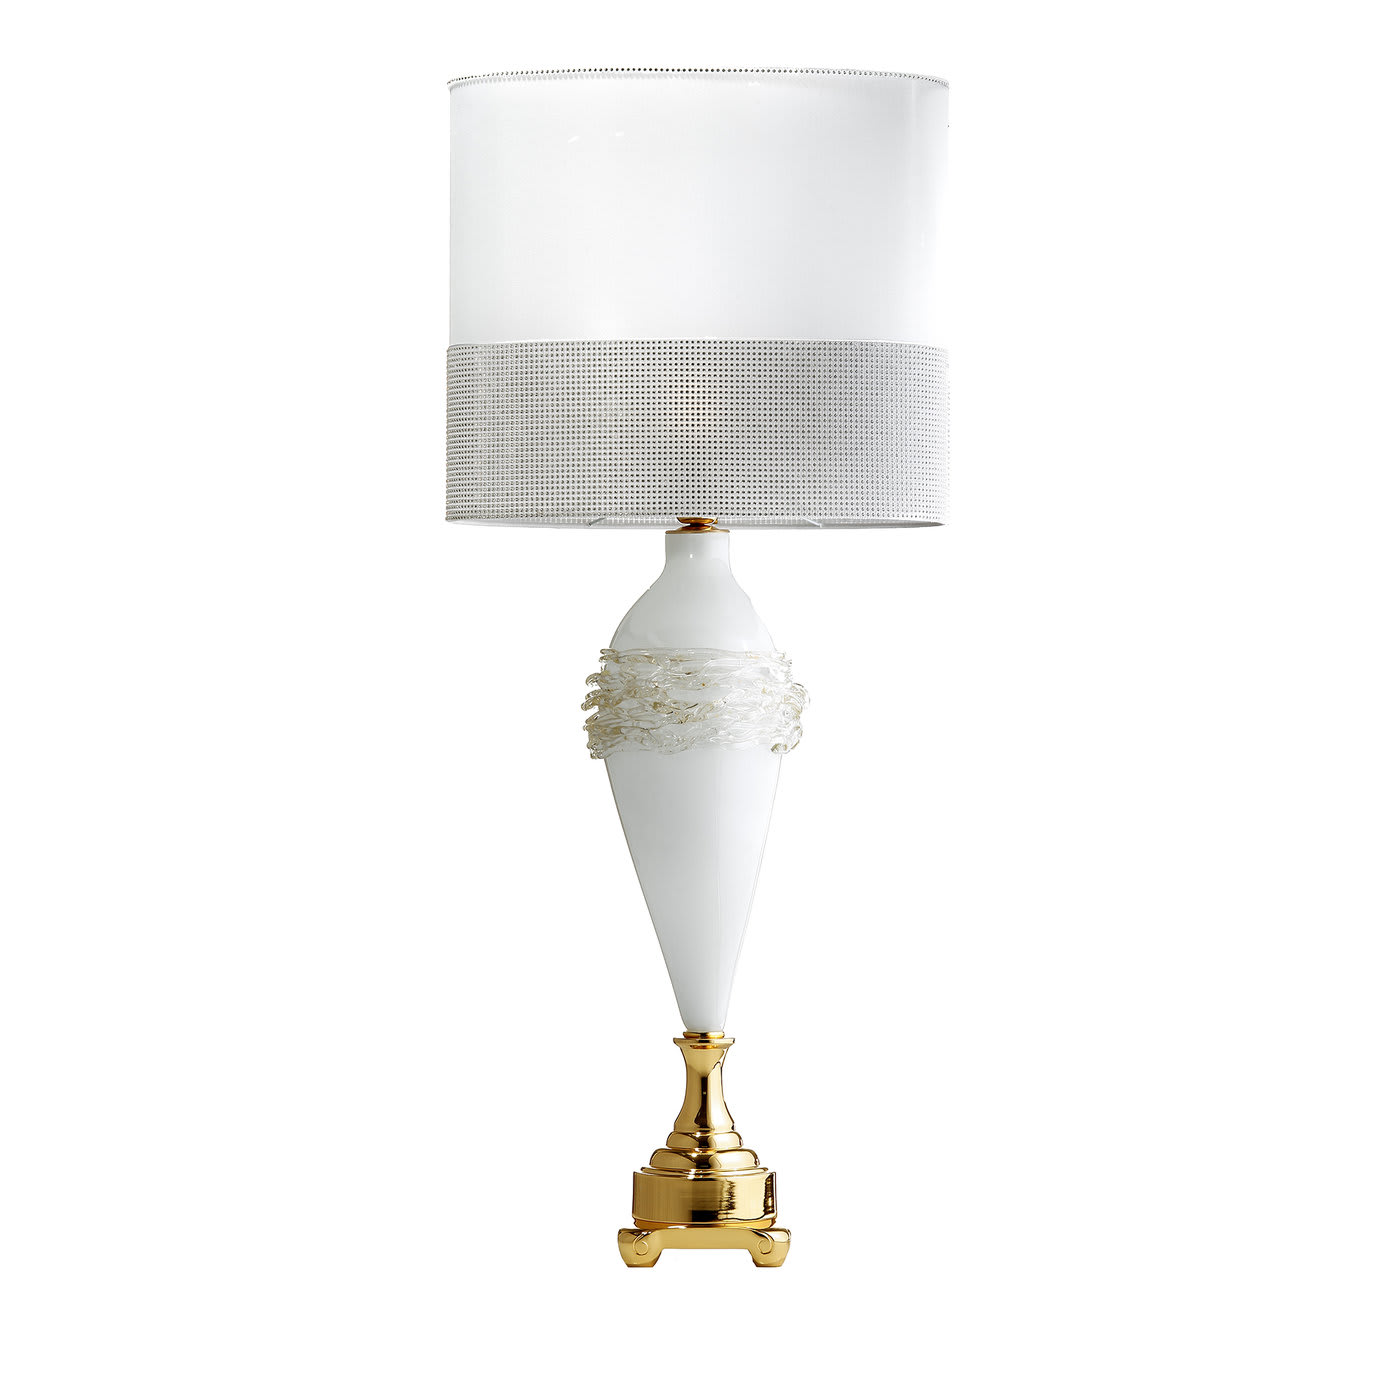 P-Gold Threads Large Table Lamp - Il Paralume Marina